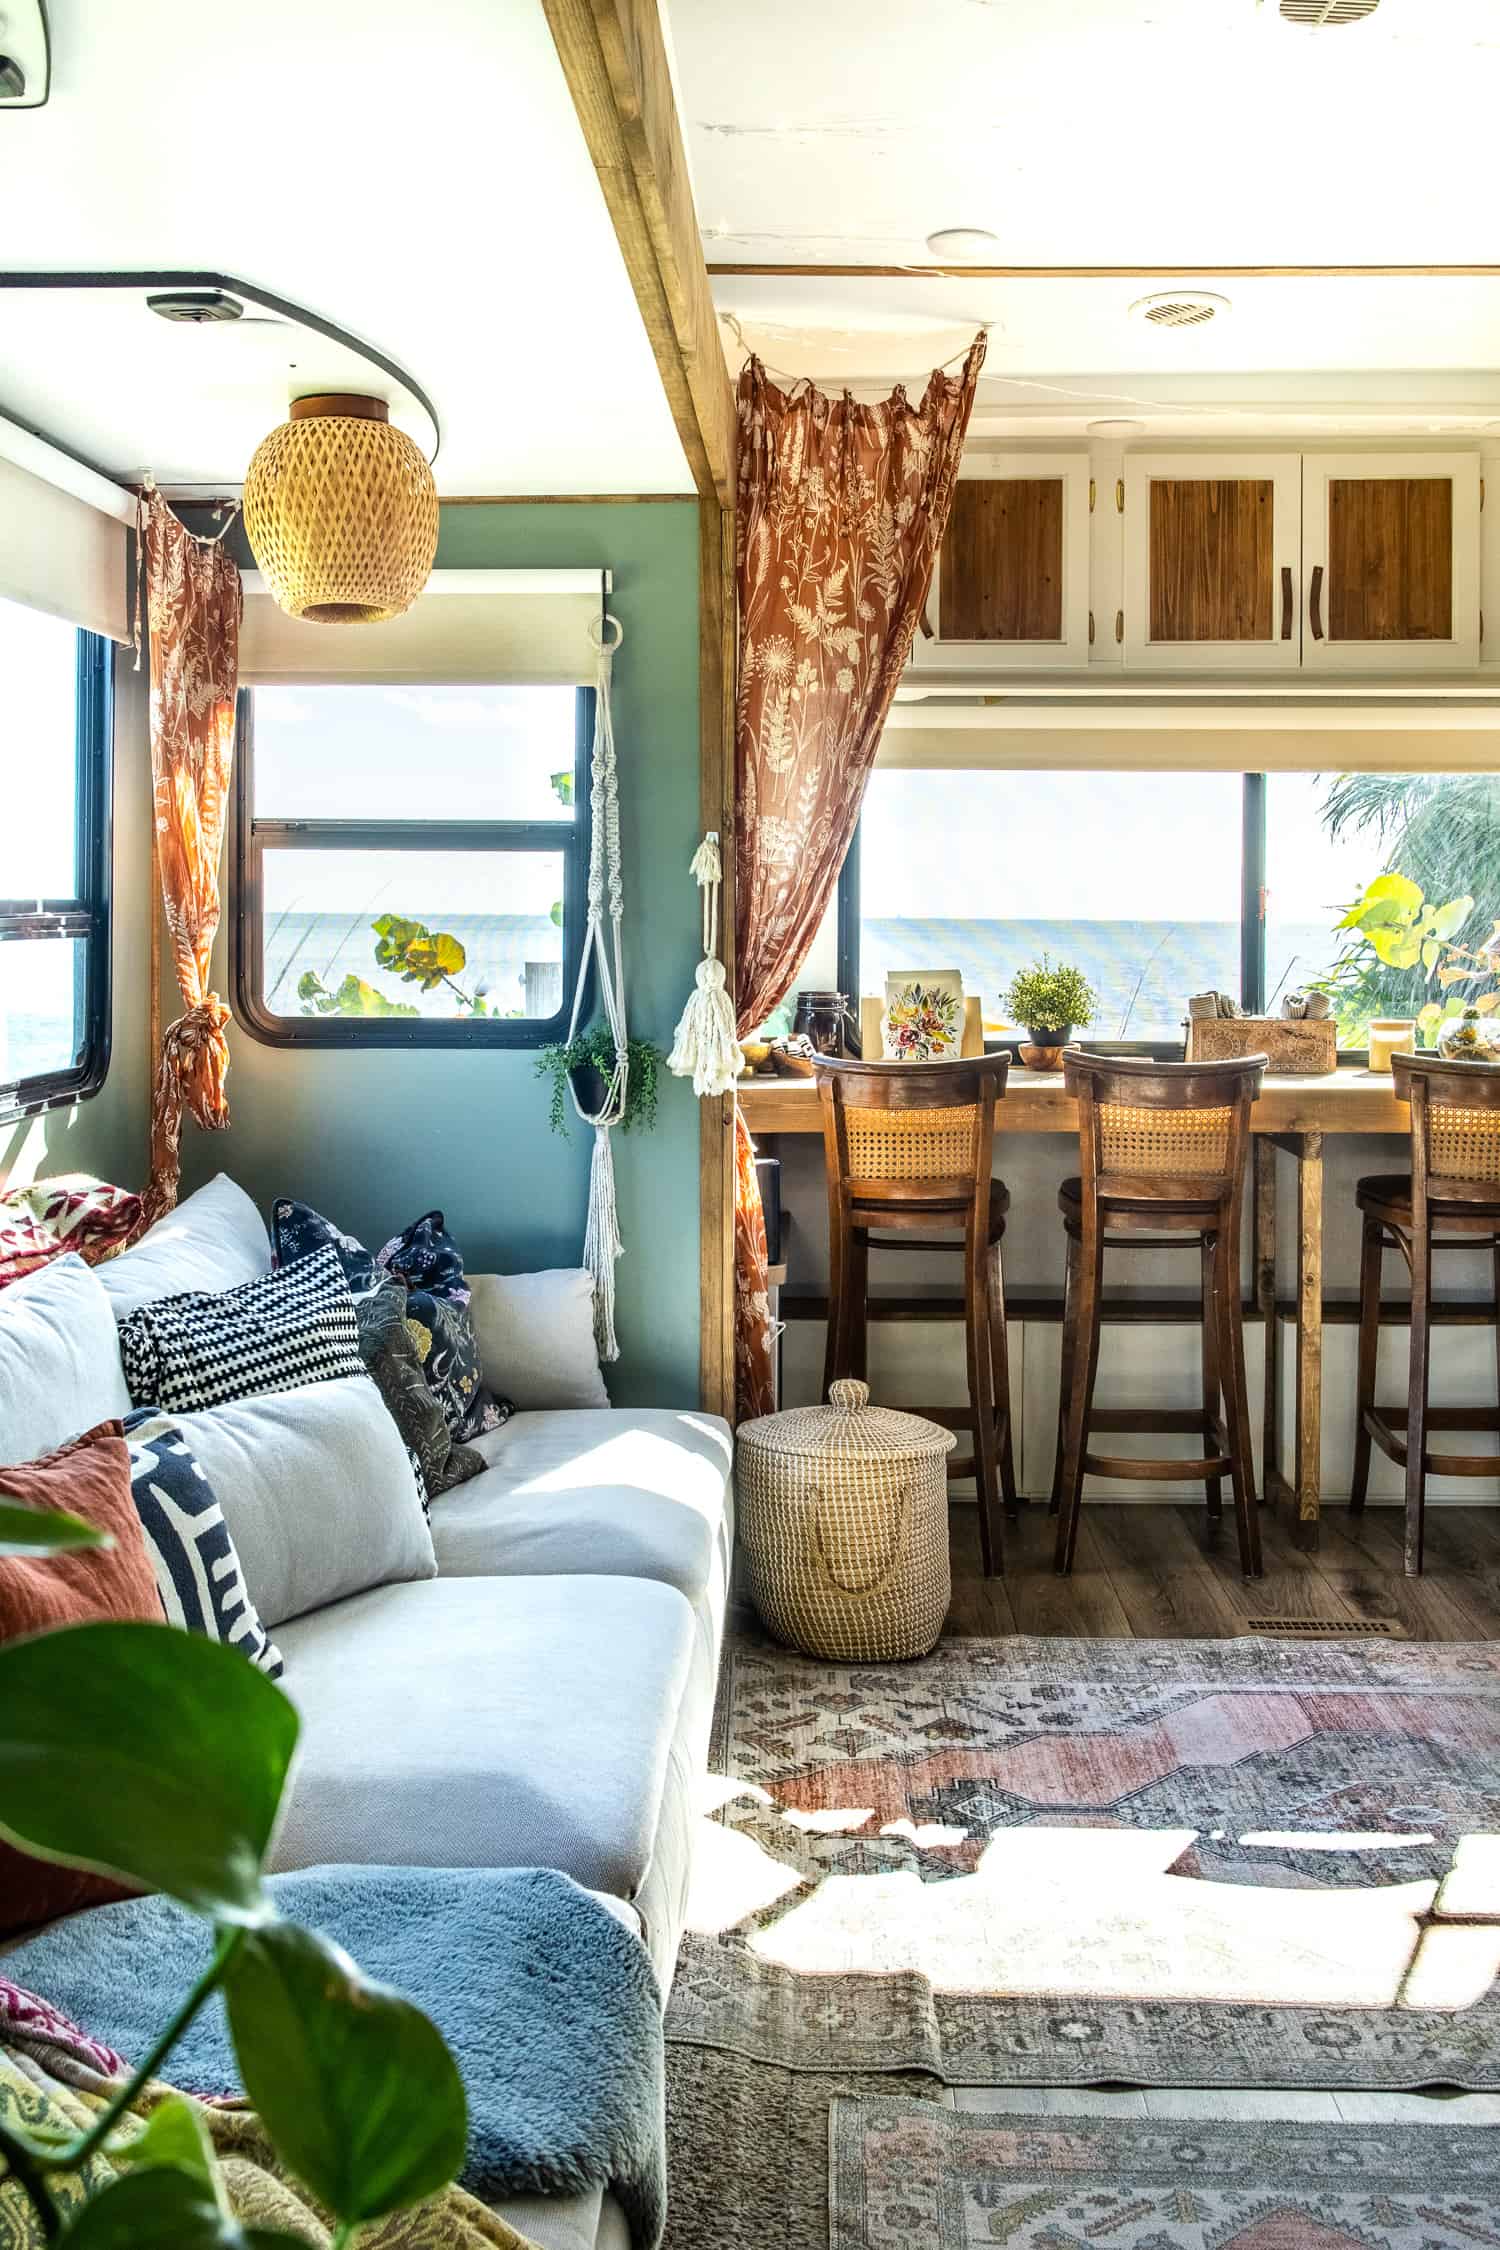 Amazing eclectic style camper renovation with vintage accents and lots of style.